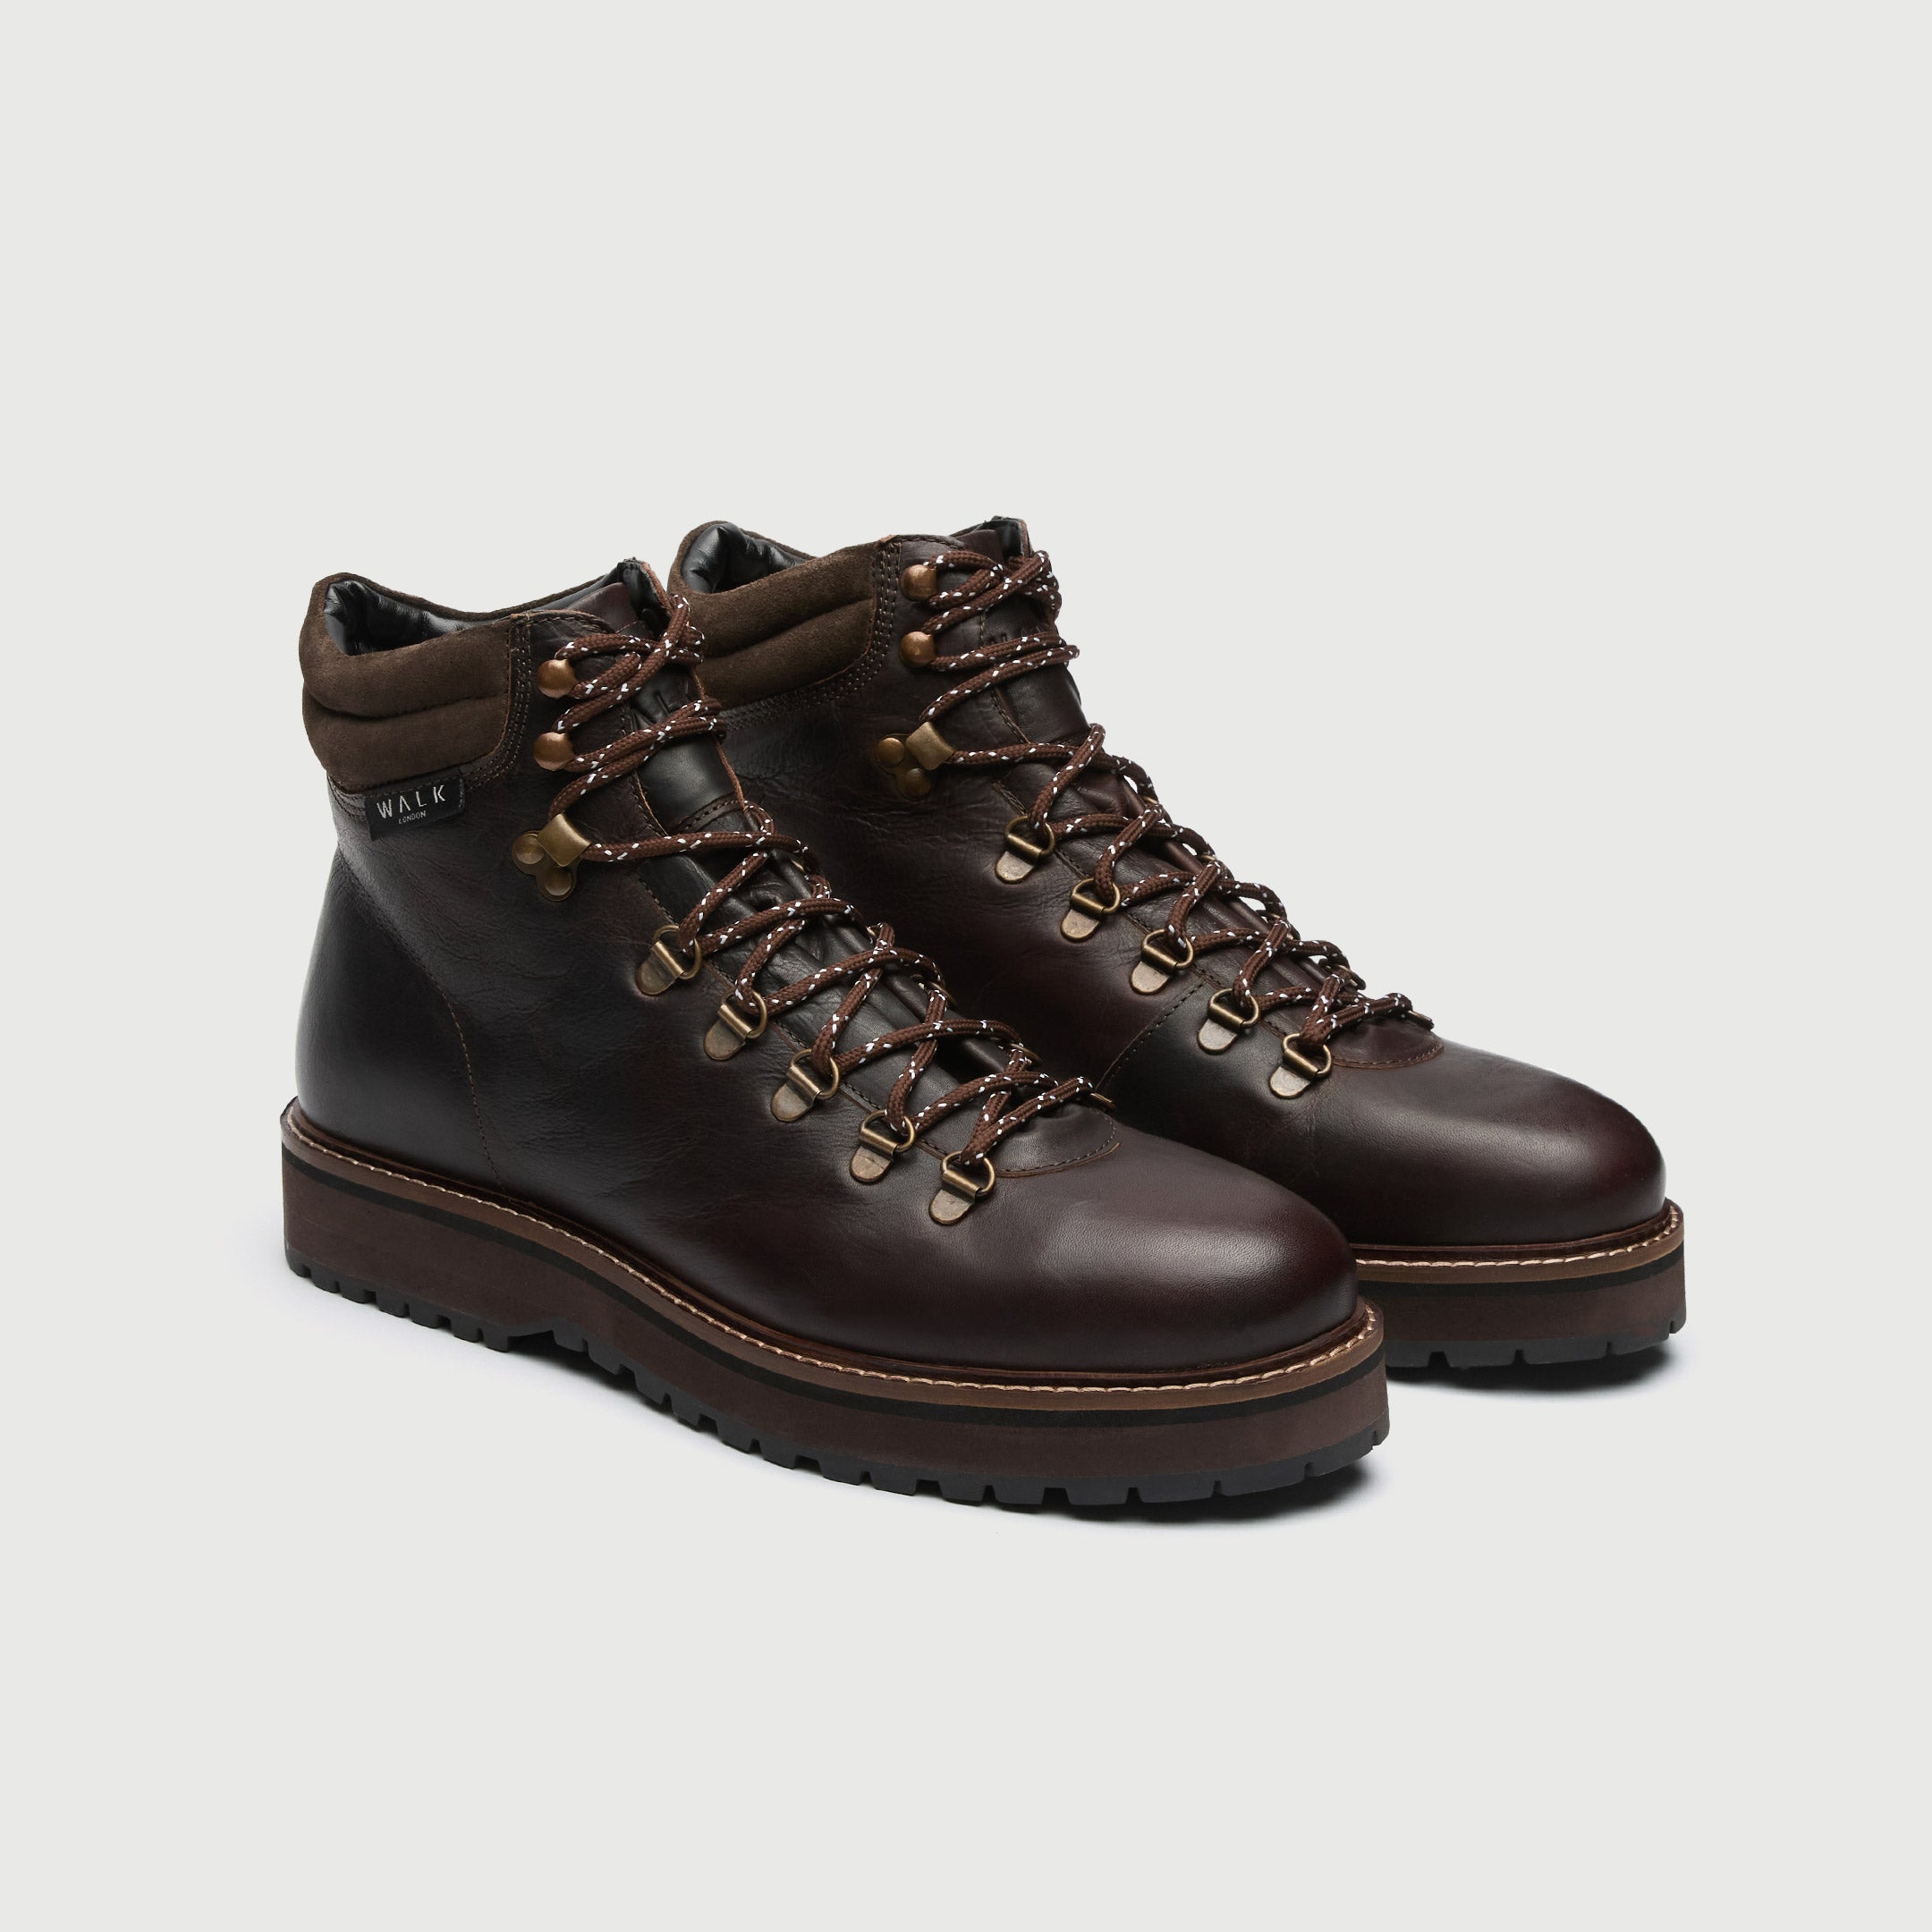 WALK London Mens Connery Hiking Boot in Brown Leather